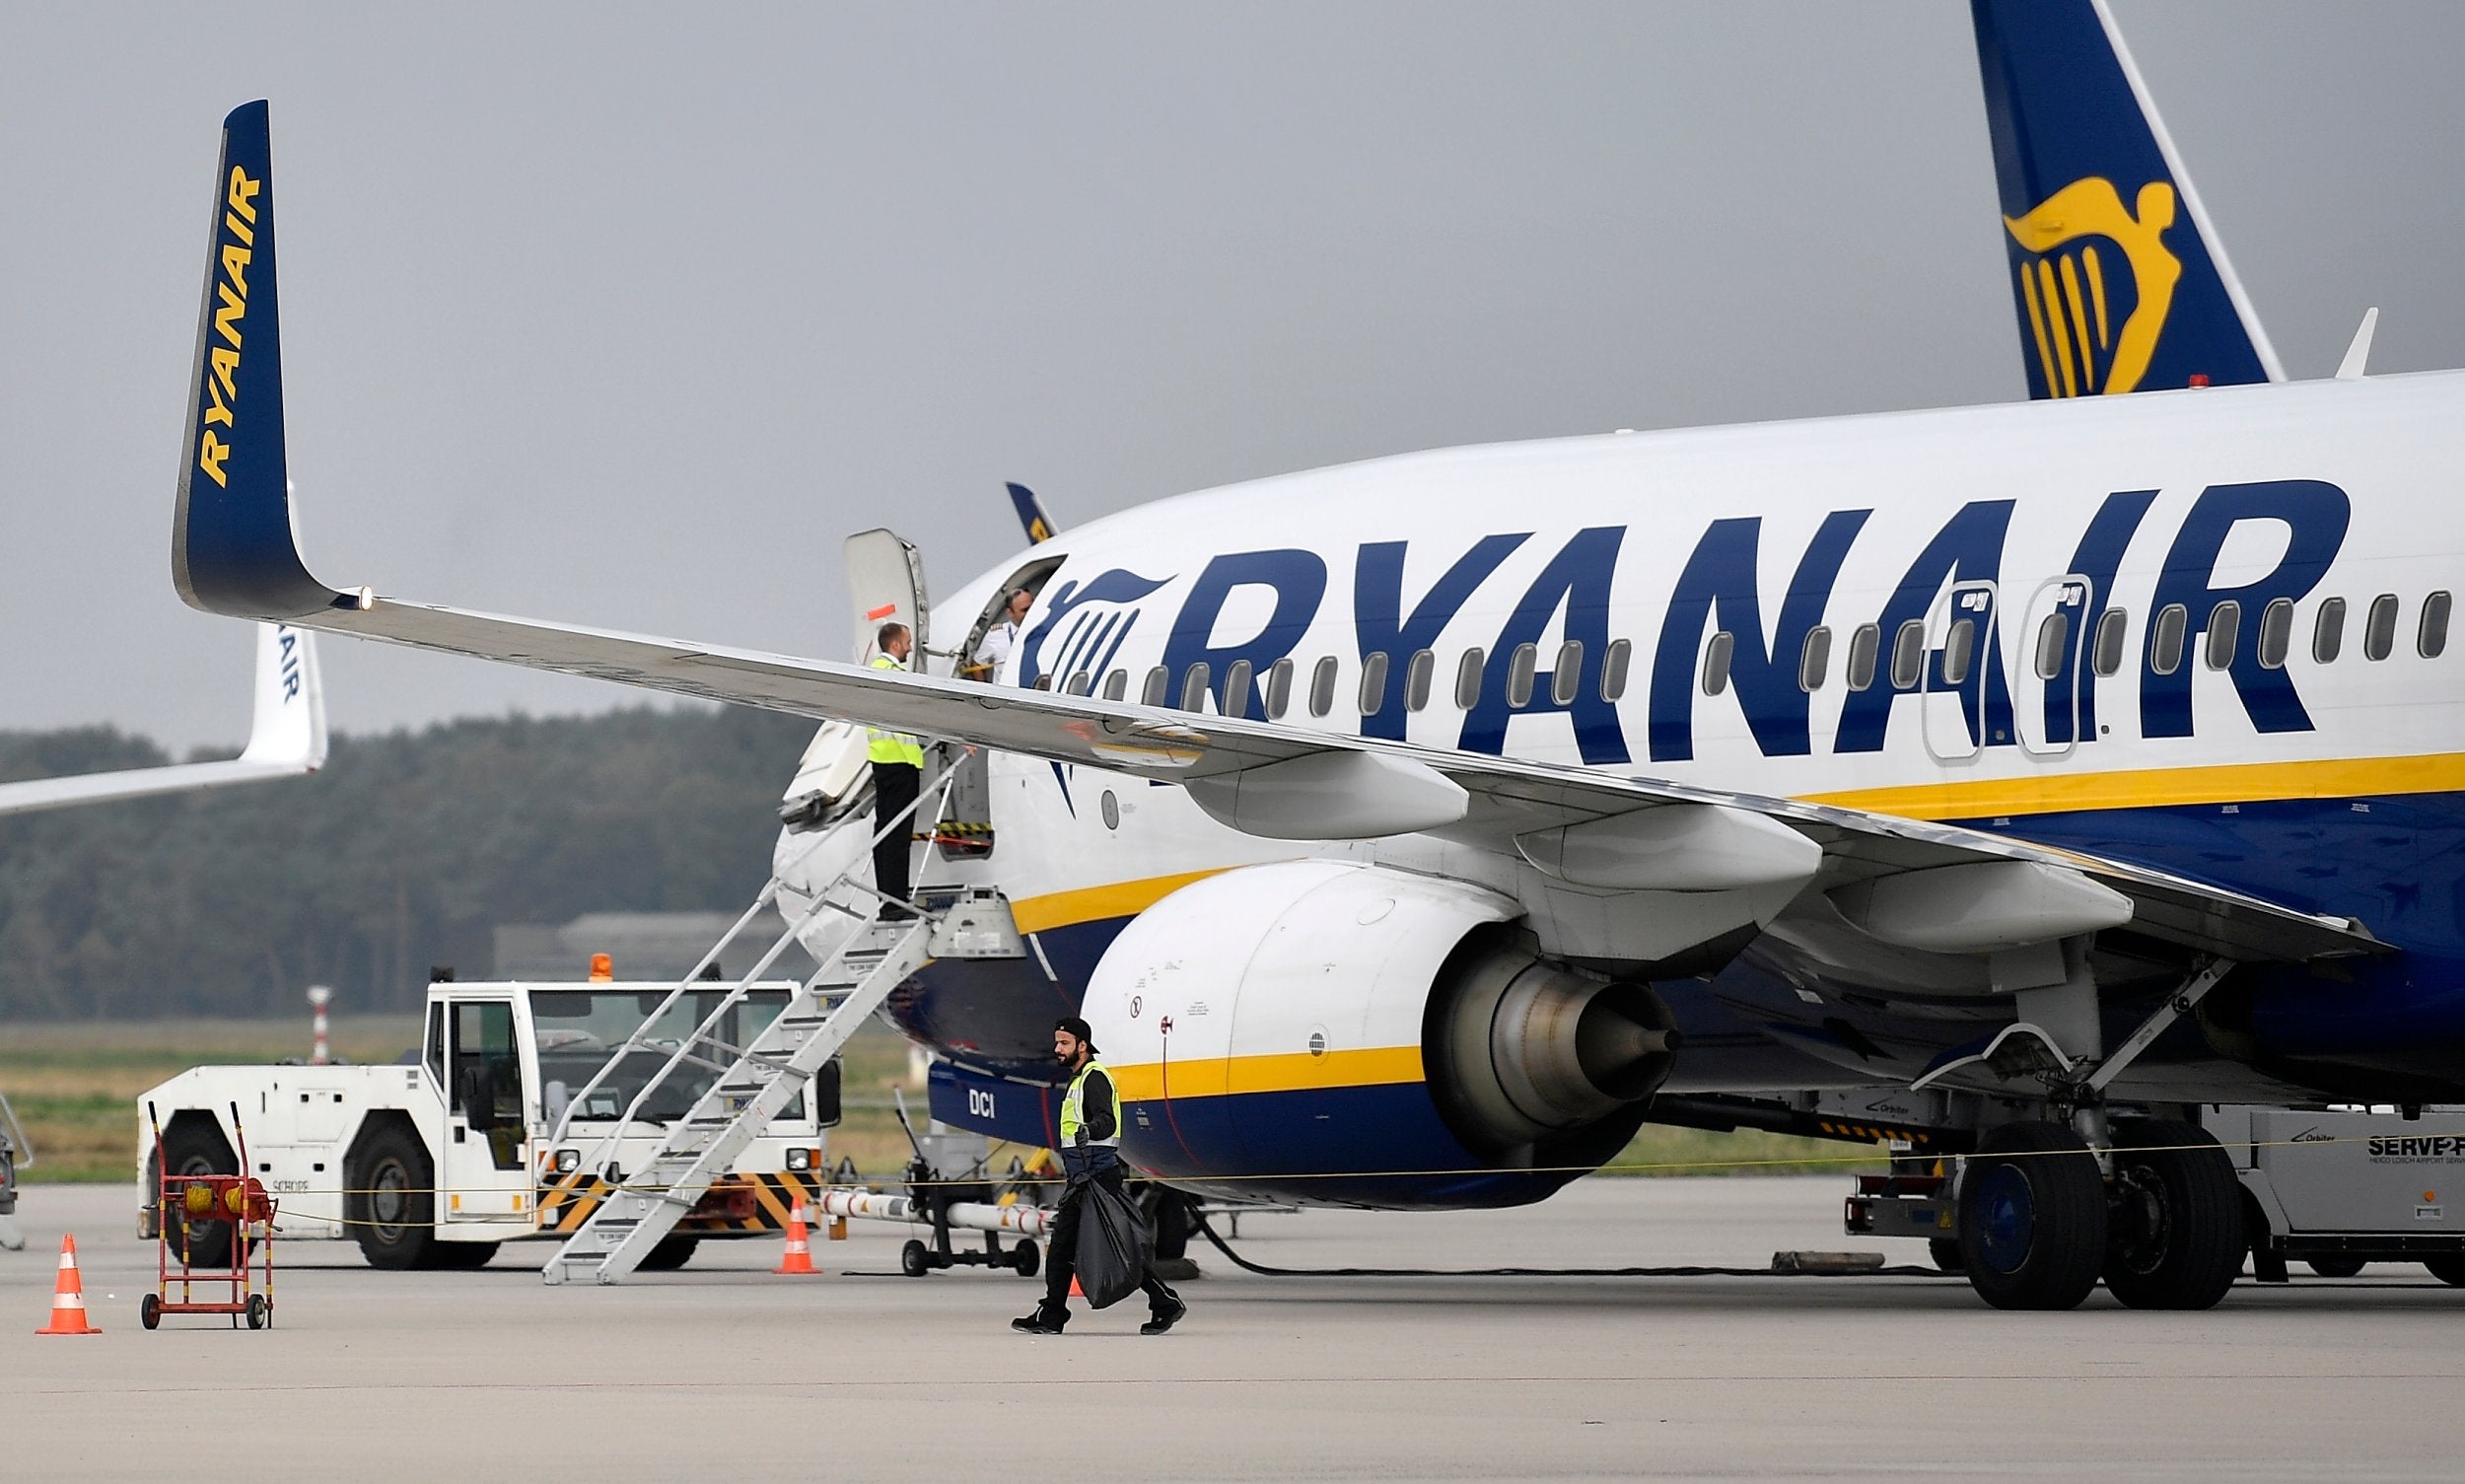 Thousands of people were affected by Ryanair delays and cancellations this summer